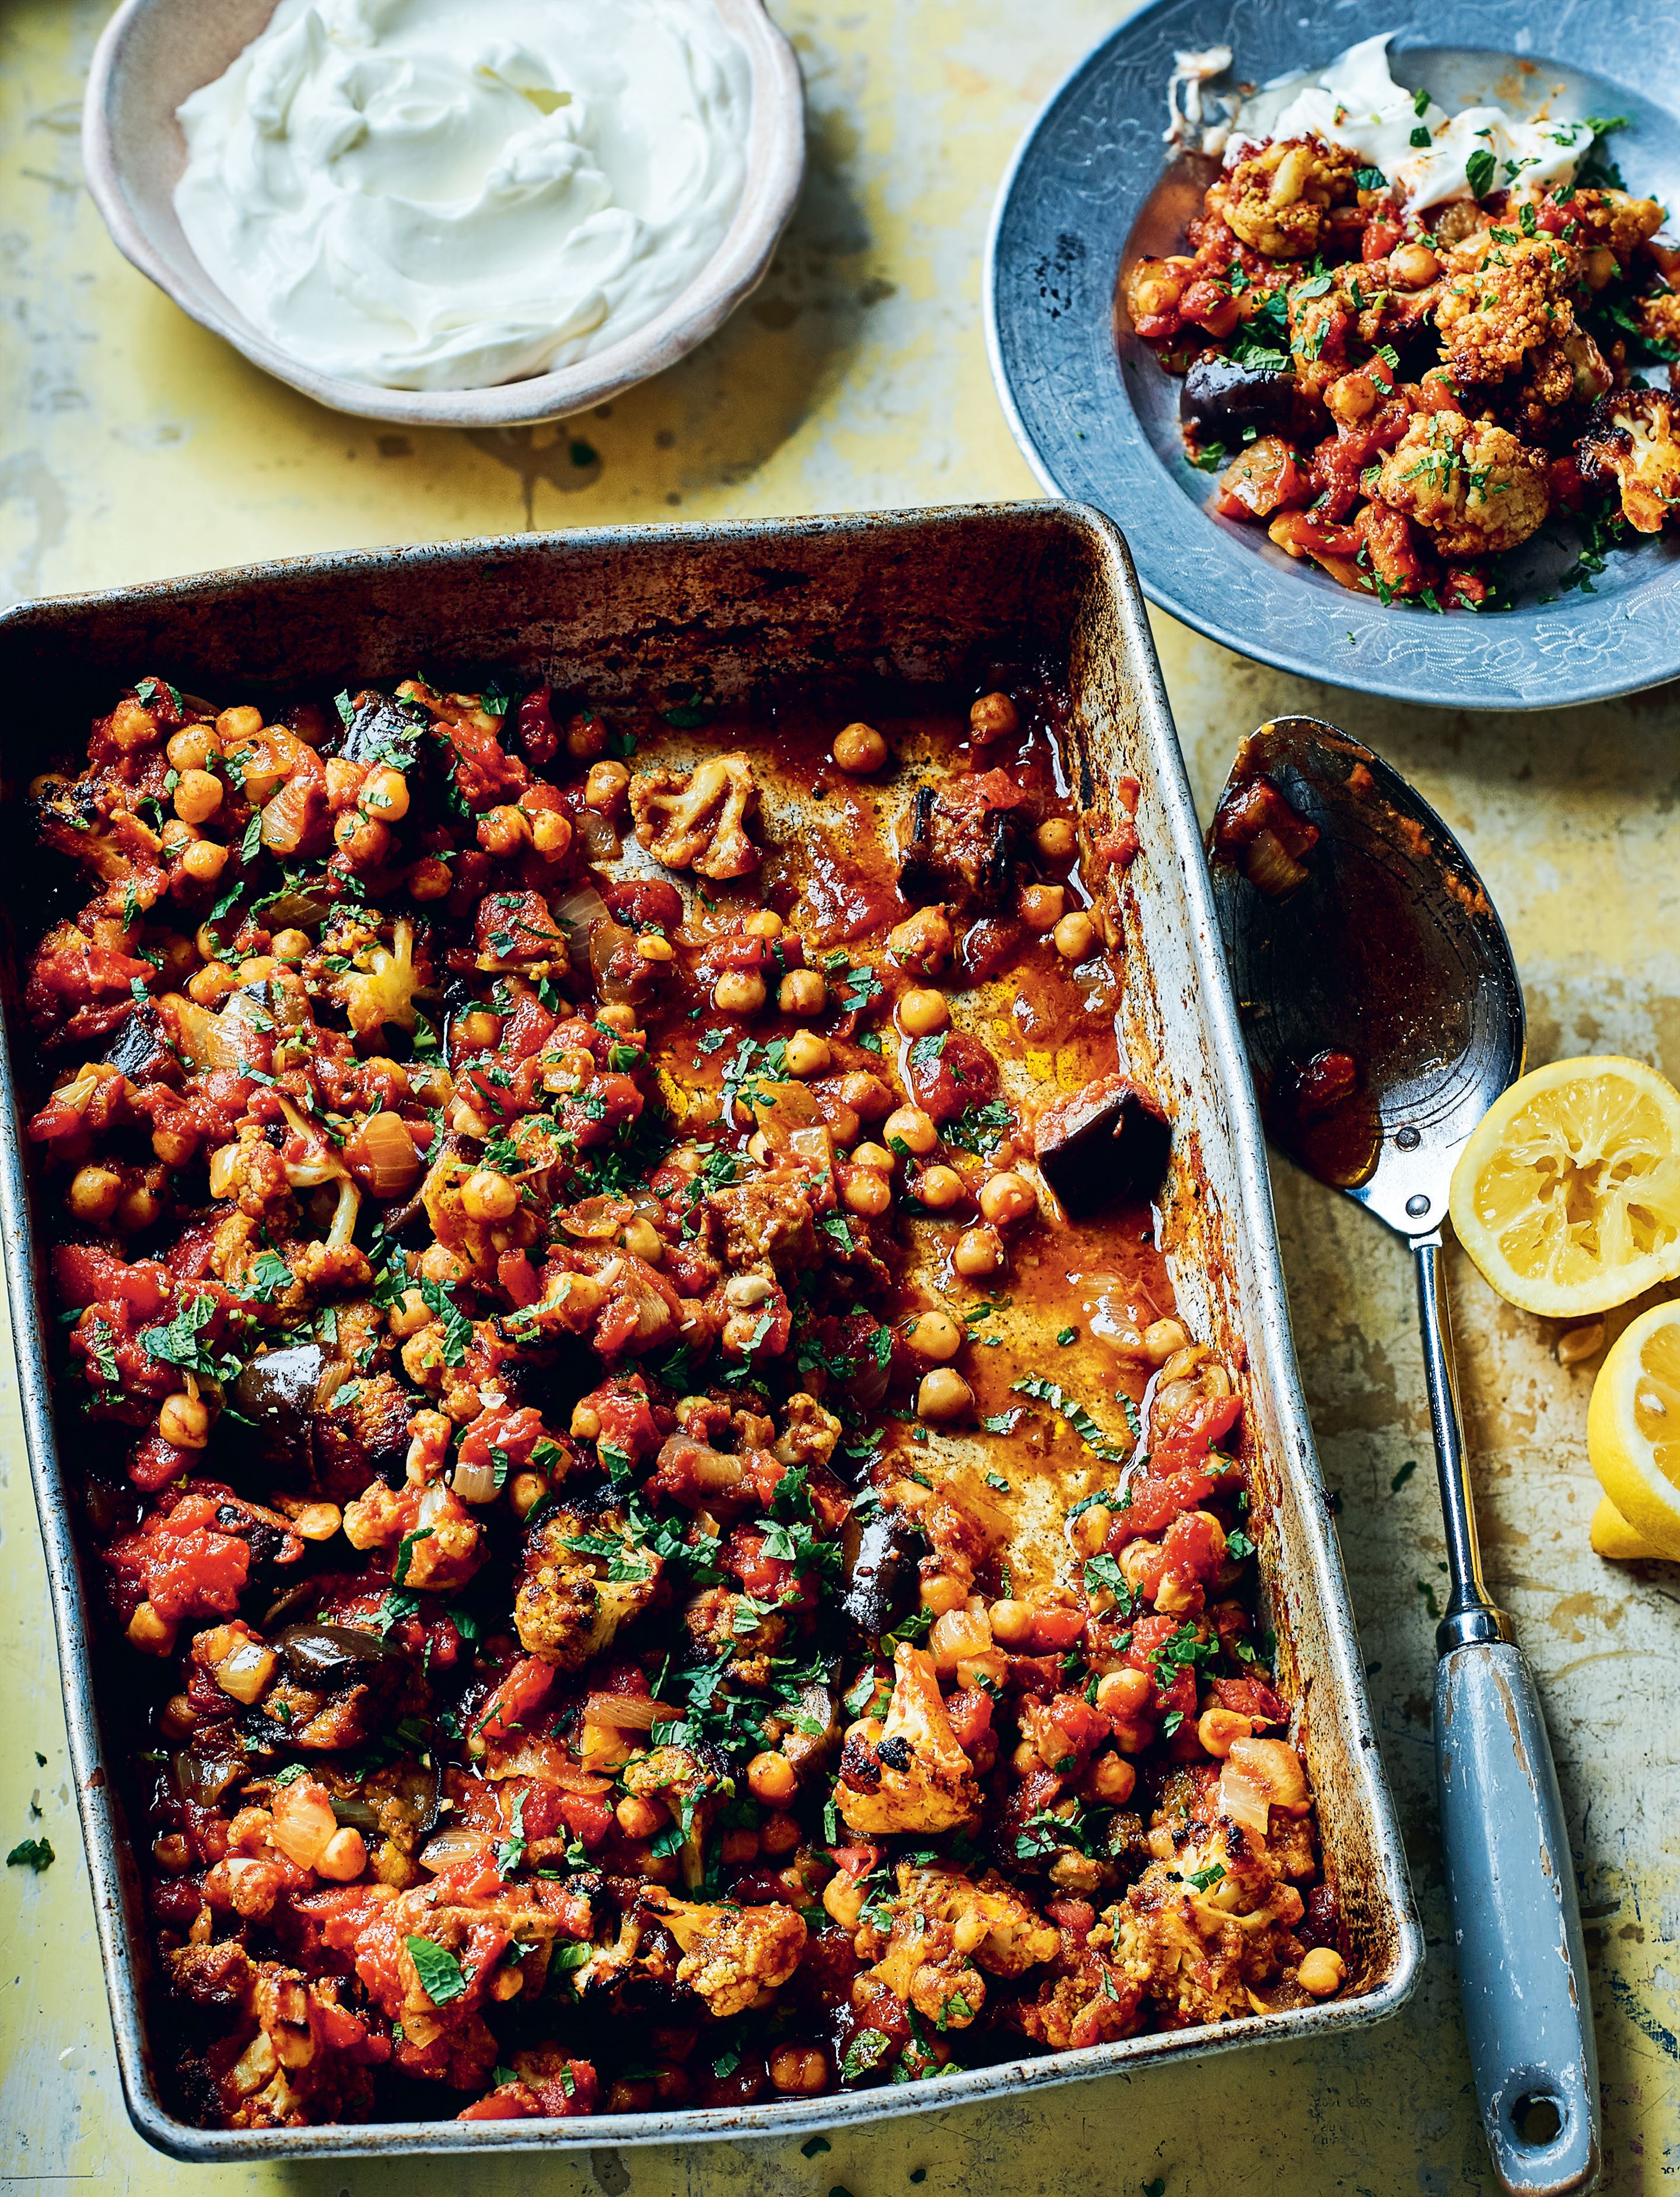 Spiced vegetables and chickpeas with yoghurt and mint